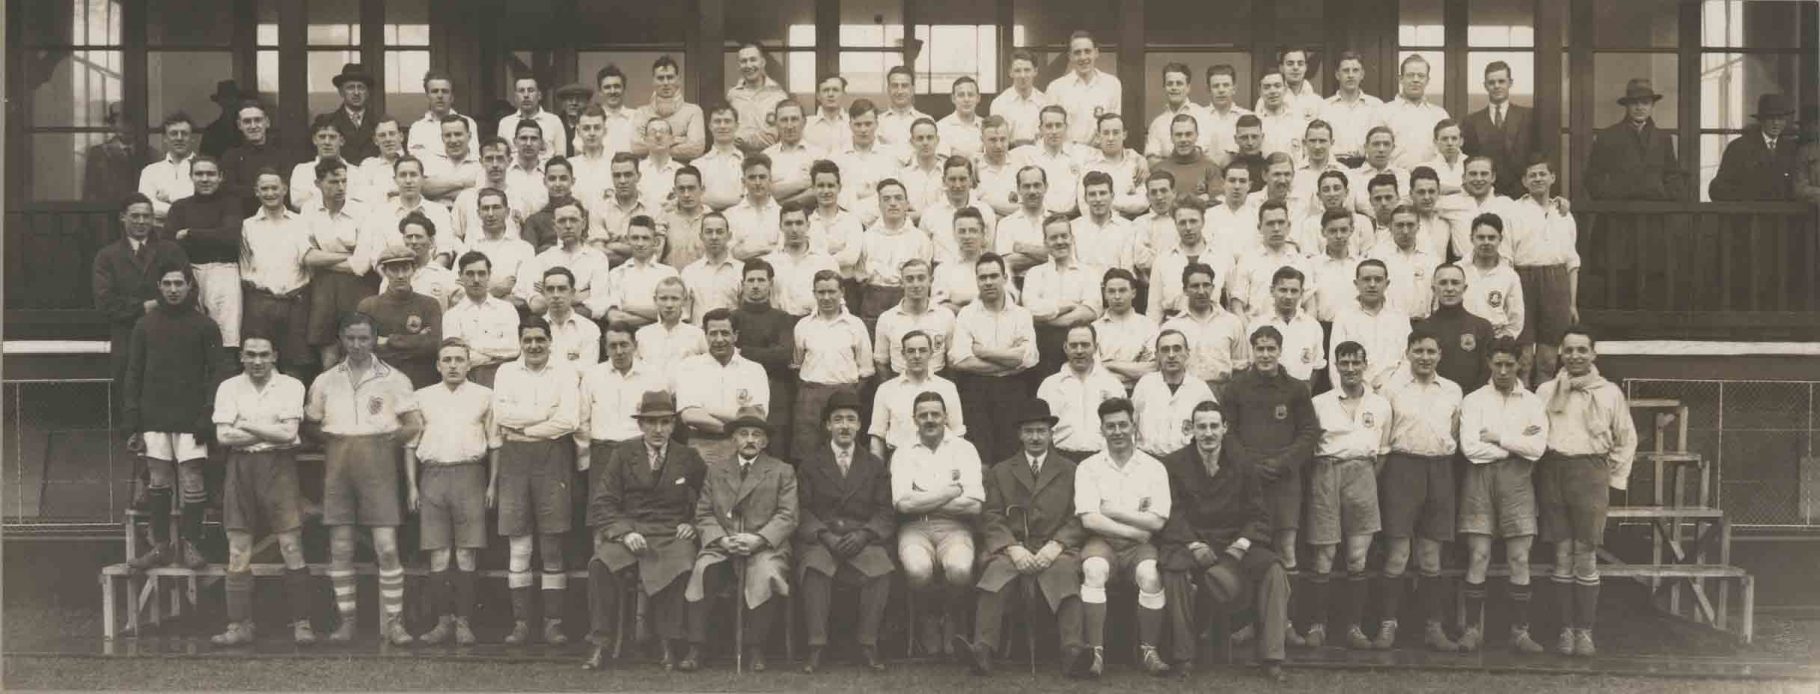 Black and white group photograph of sports team